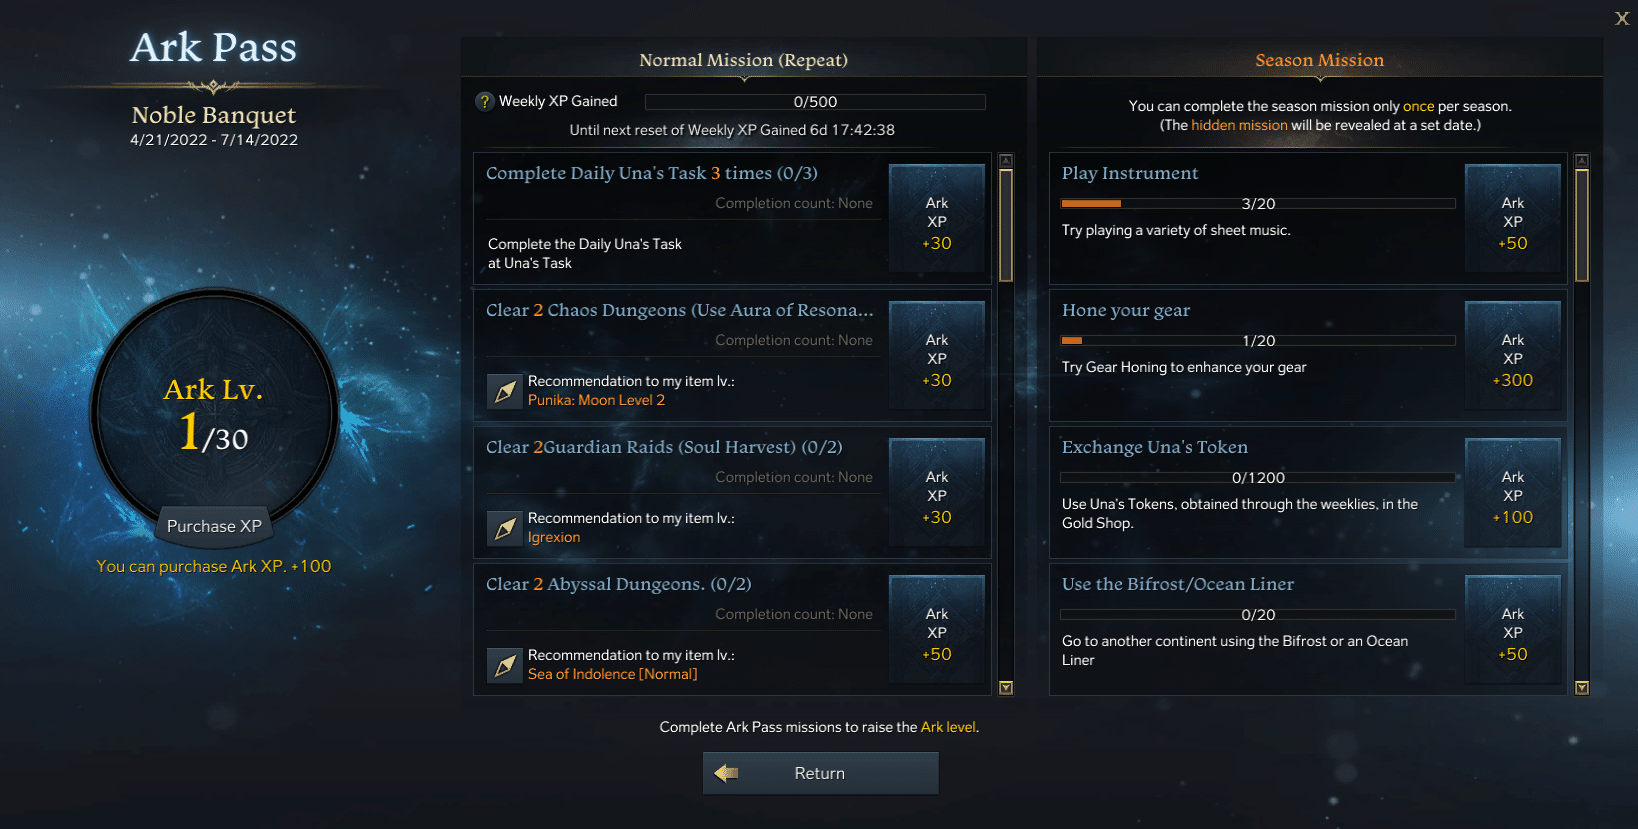 Lost Ark Missions UI For the Ark Pass